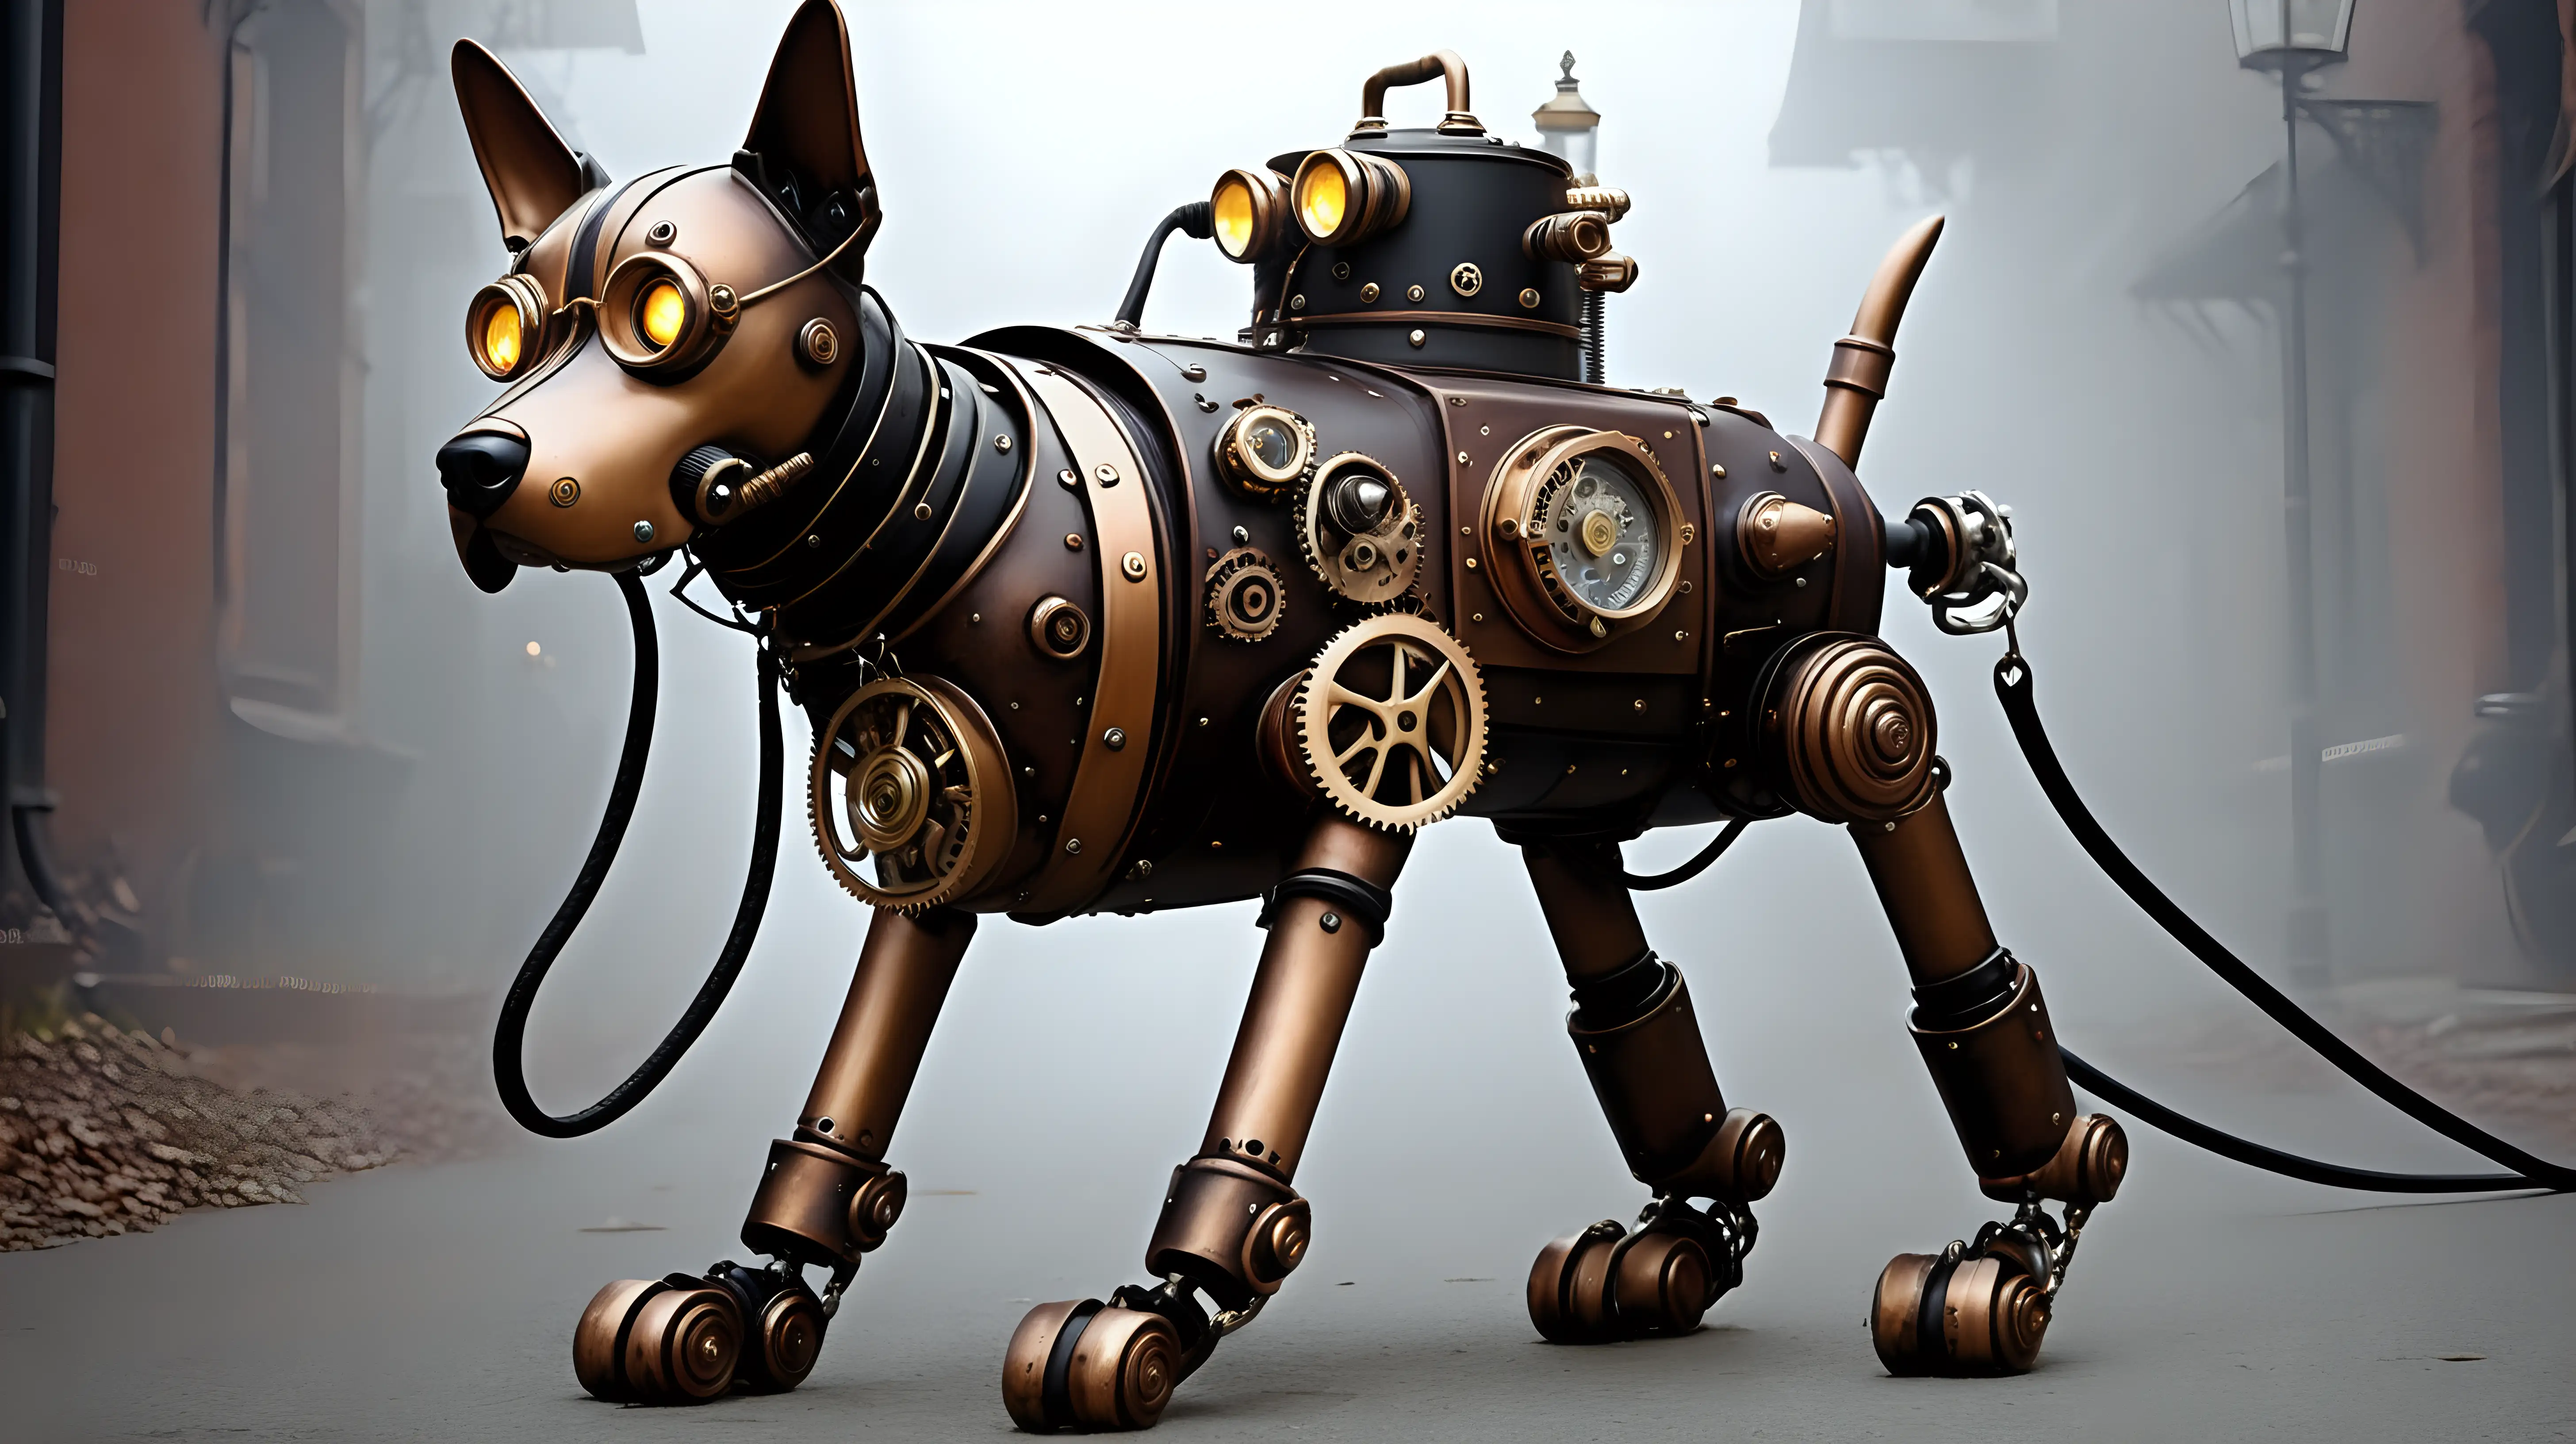 Steampunk Robot Dog with Women in Soft Lights Leash in Street Fog